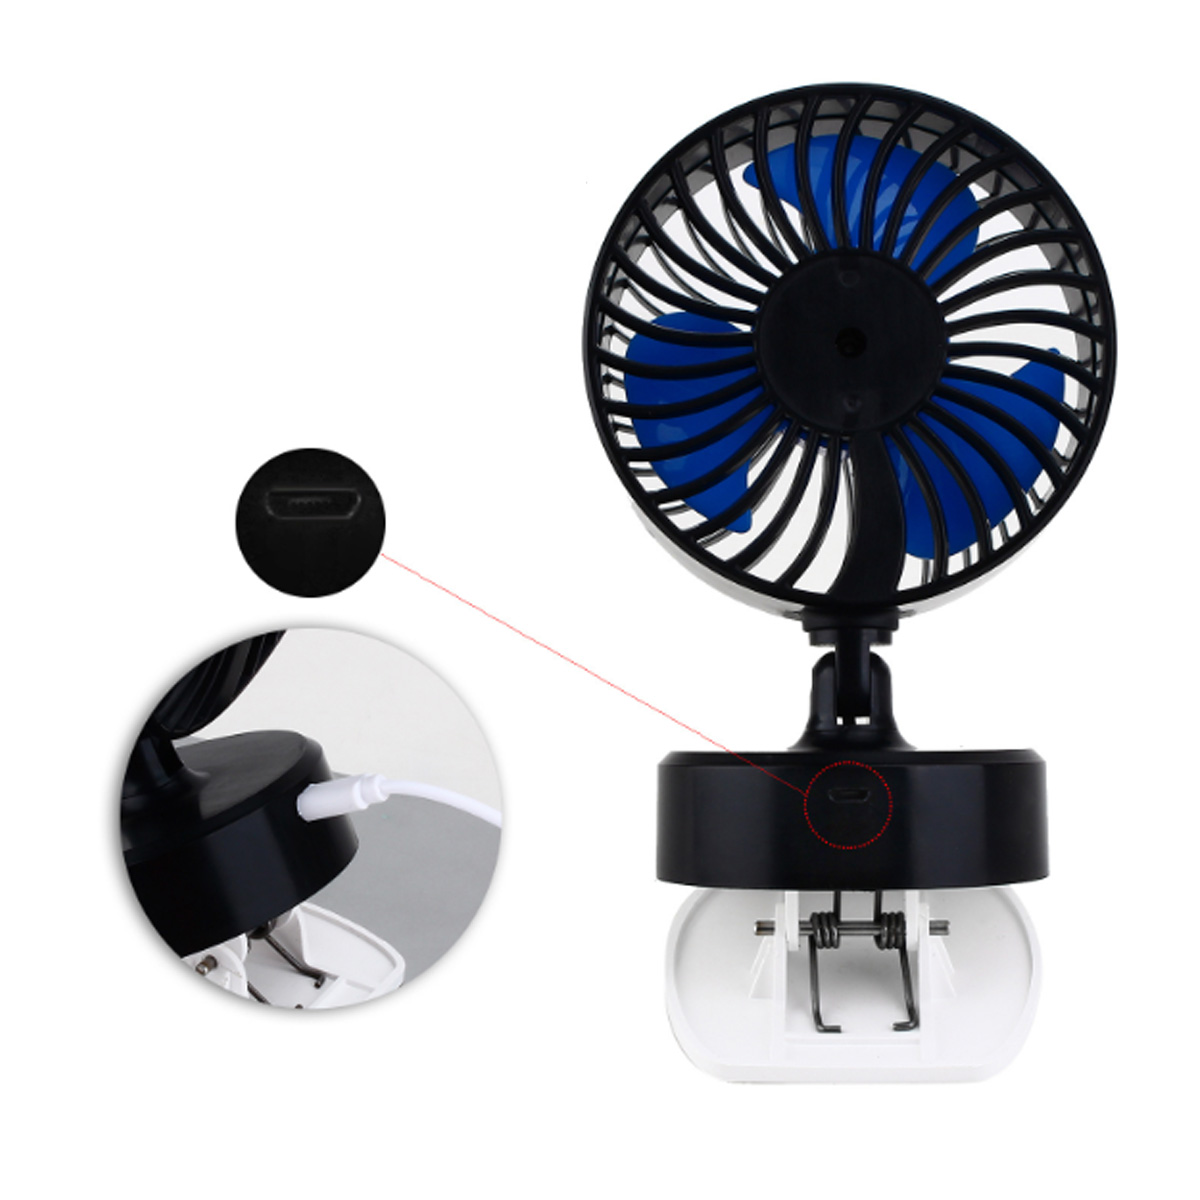 3Modes-Mini-Portable-Summer-Fan-Outdoor-Camping-USB-Rrchargeable-Desk-Fan-with-Safety-Clip-1526868-6